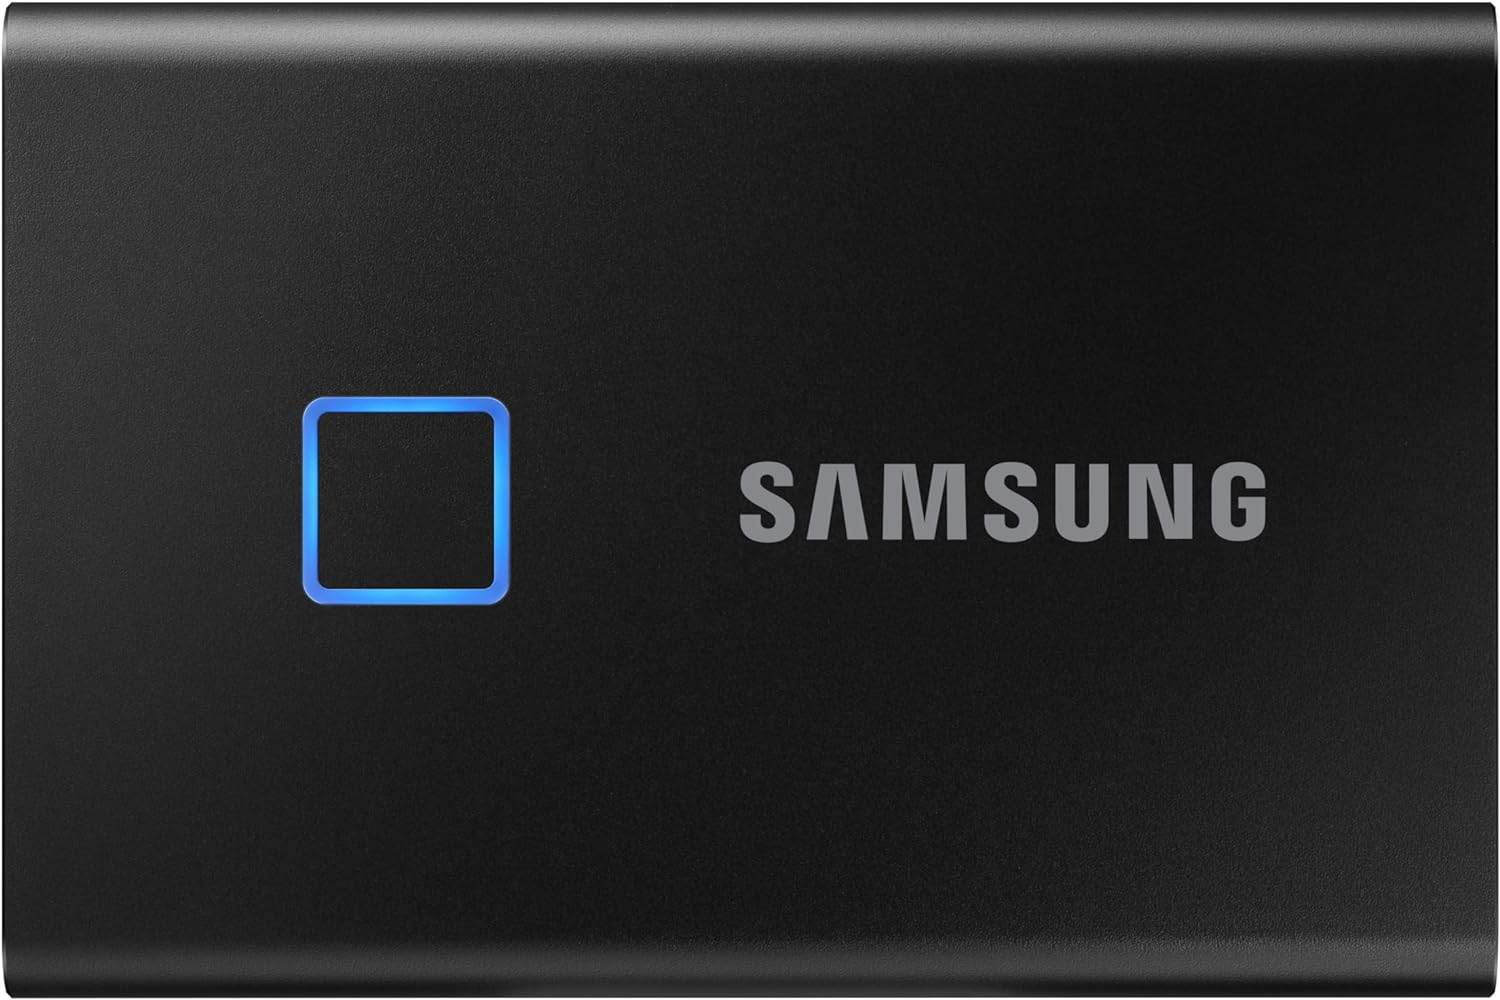 MU-PC2T0K/WW SAMSUNG T7 Touch Portable SSD 2TB SAMSUNG T7 Touch Portable SSD 2TB ,up to 1050MB/s, USB 3.2 External Solid State Drive, Fingerprint Security Encryption ,  Solid Aluminum , Compatible with PC, Mac, Android - Black (MU-PC2T0K/WW)